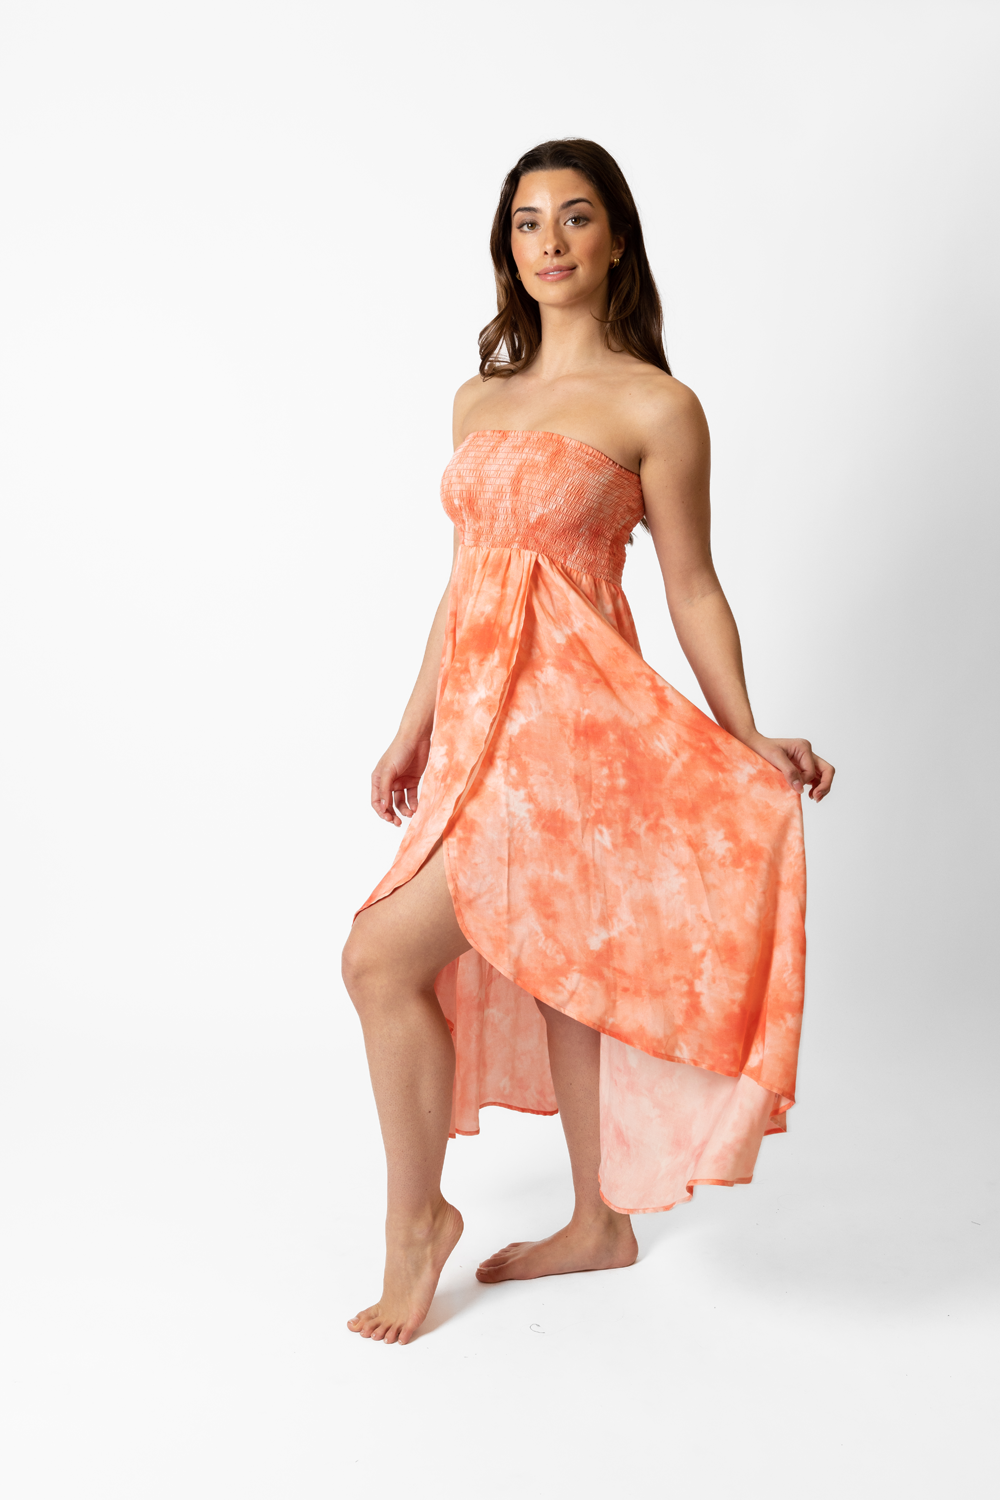 A woman wearing coral tie-dye inspired beach cover up dress. Woman's outfit and pose suggesting a confident and stylish attitude.